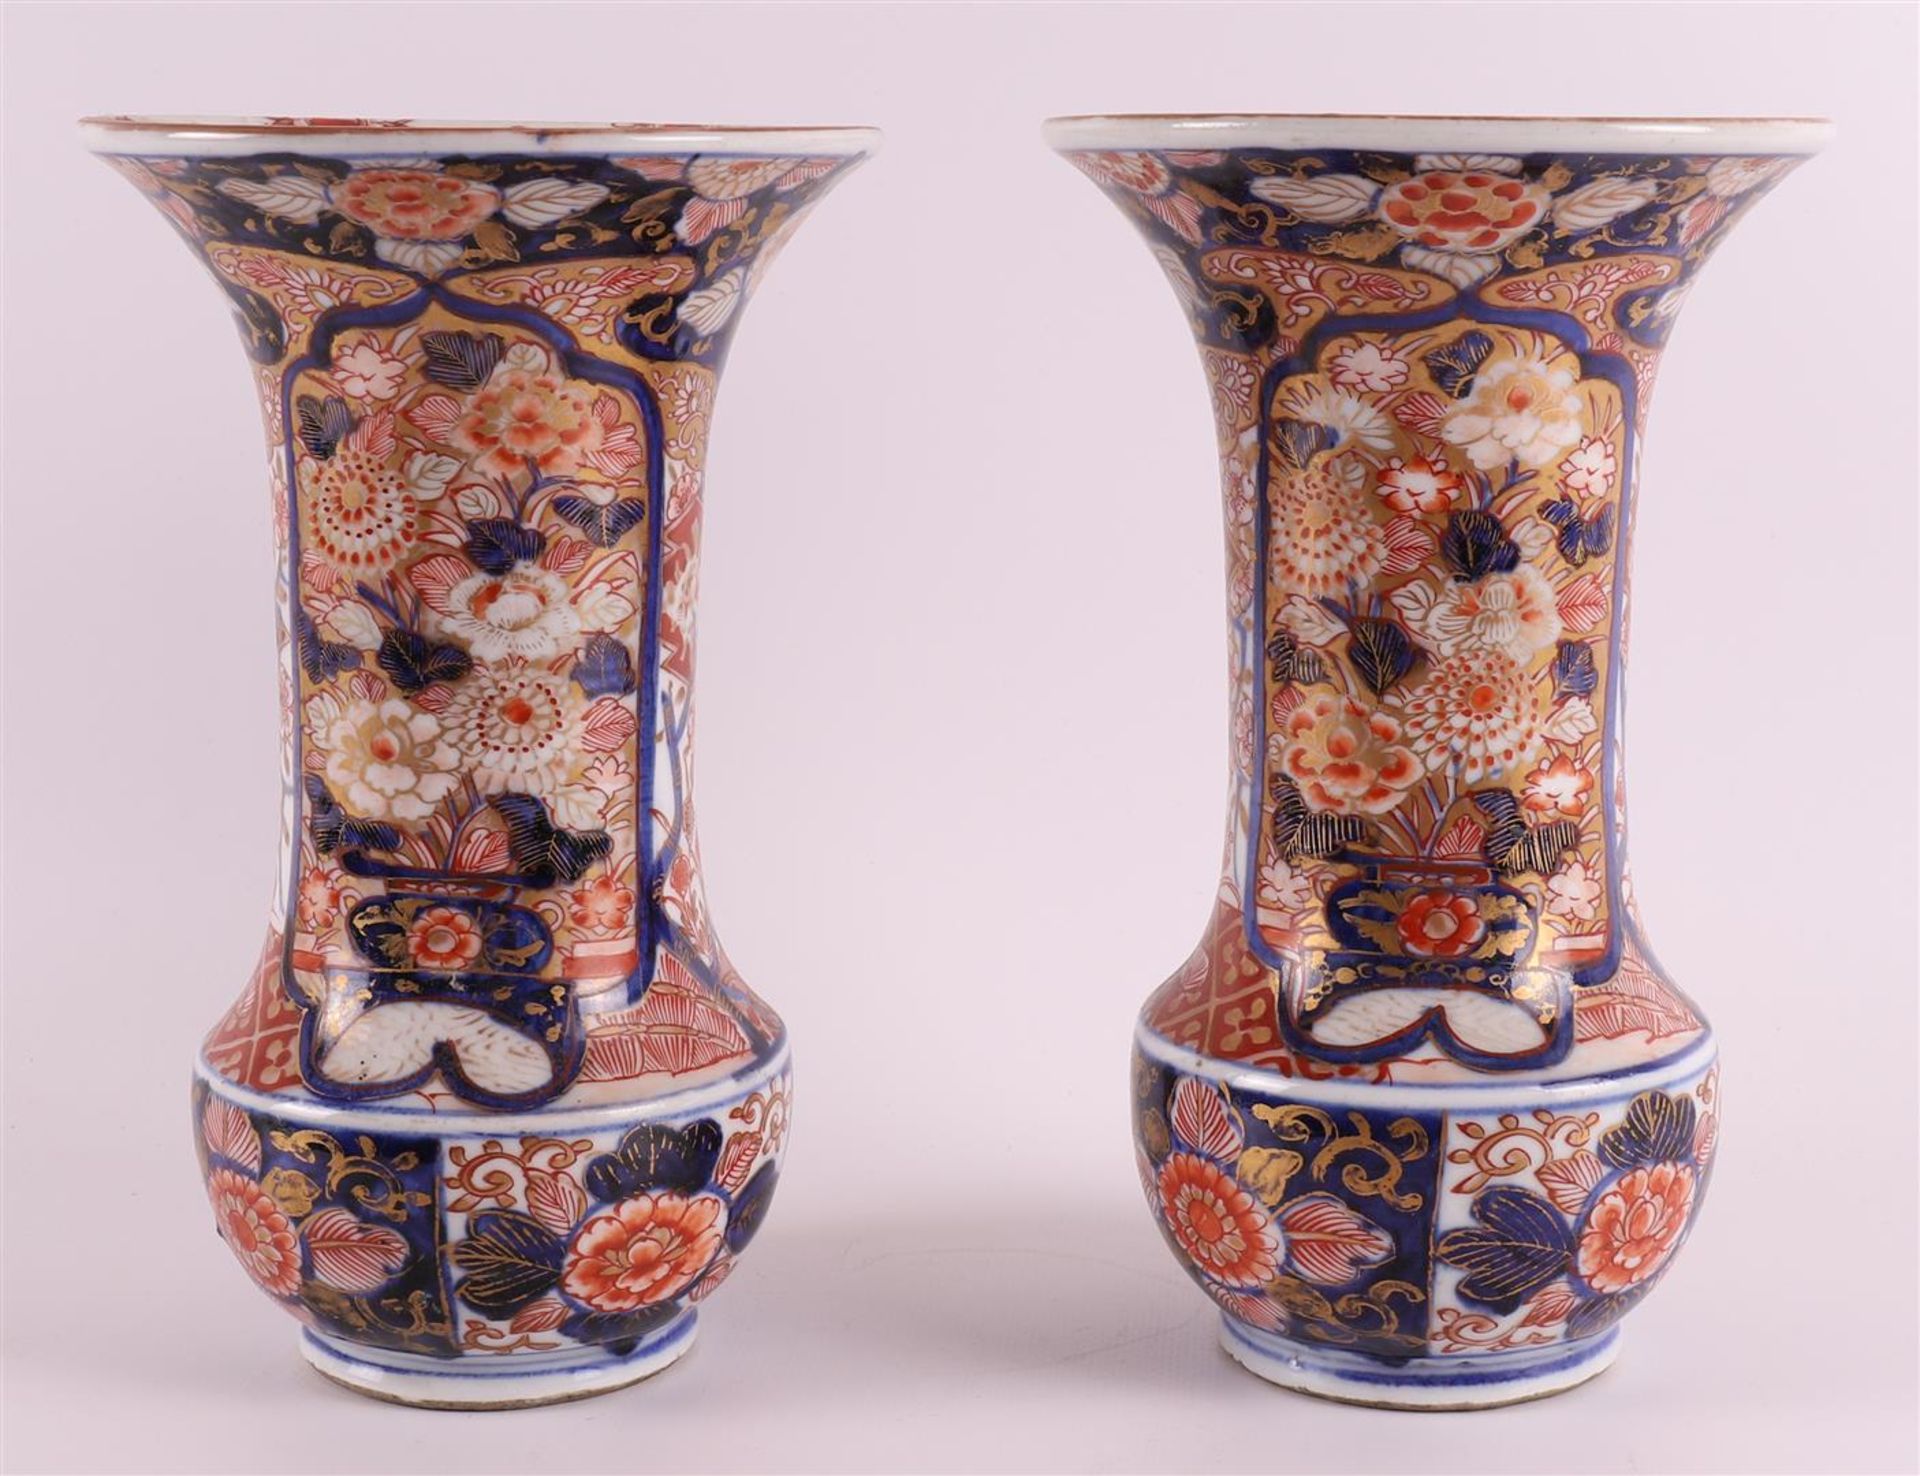 A five-piece porcelain Imari cabinet set, consisting of: three lidded vases and two vases with - Image 12 of 17